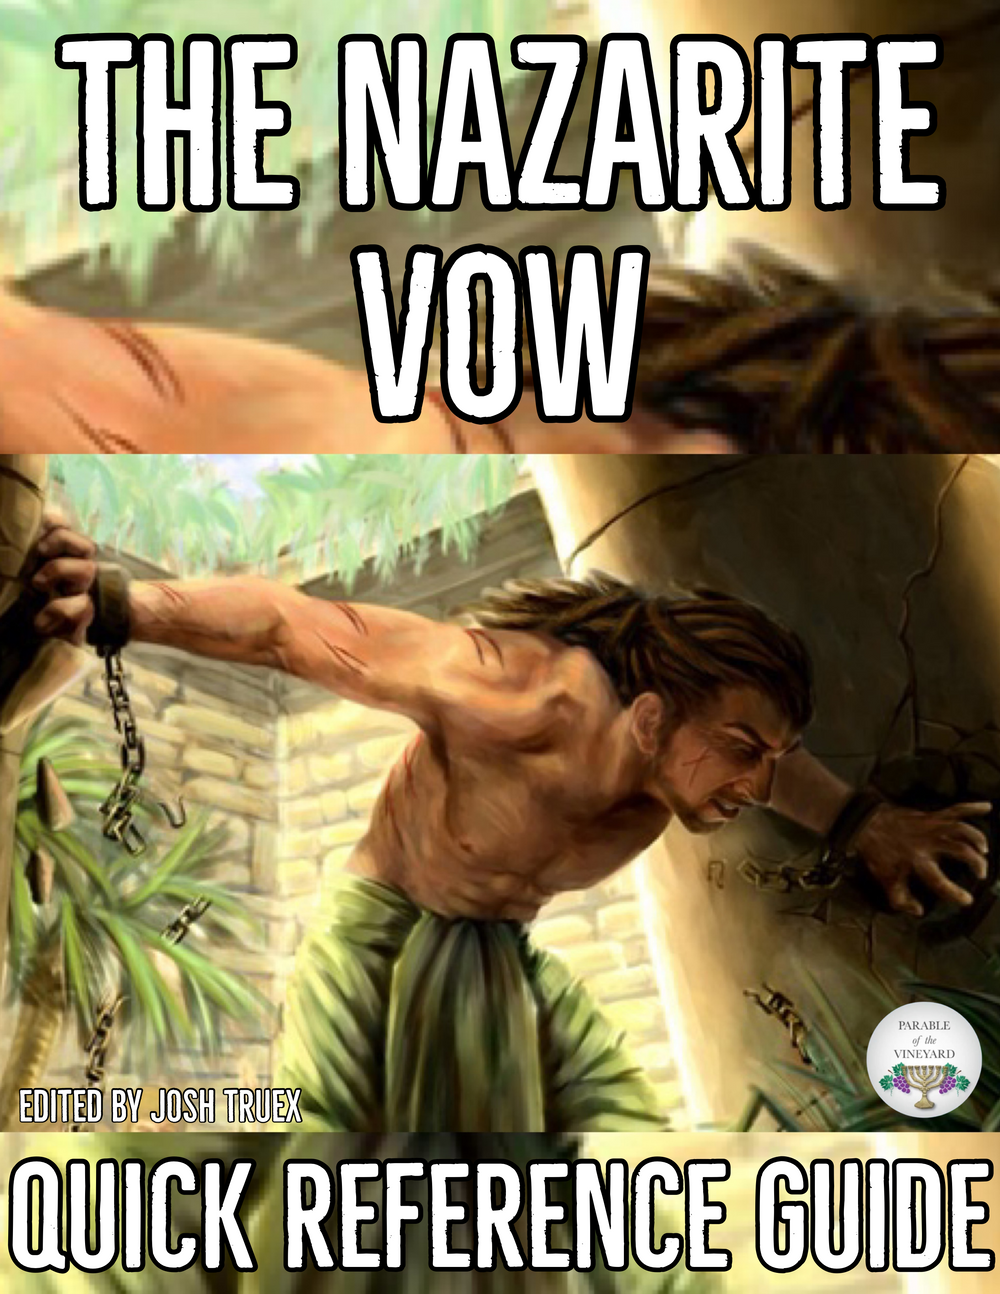 The Nazarite Vow Quick Reference Guide